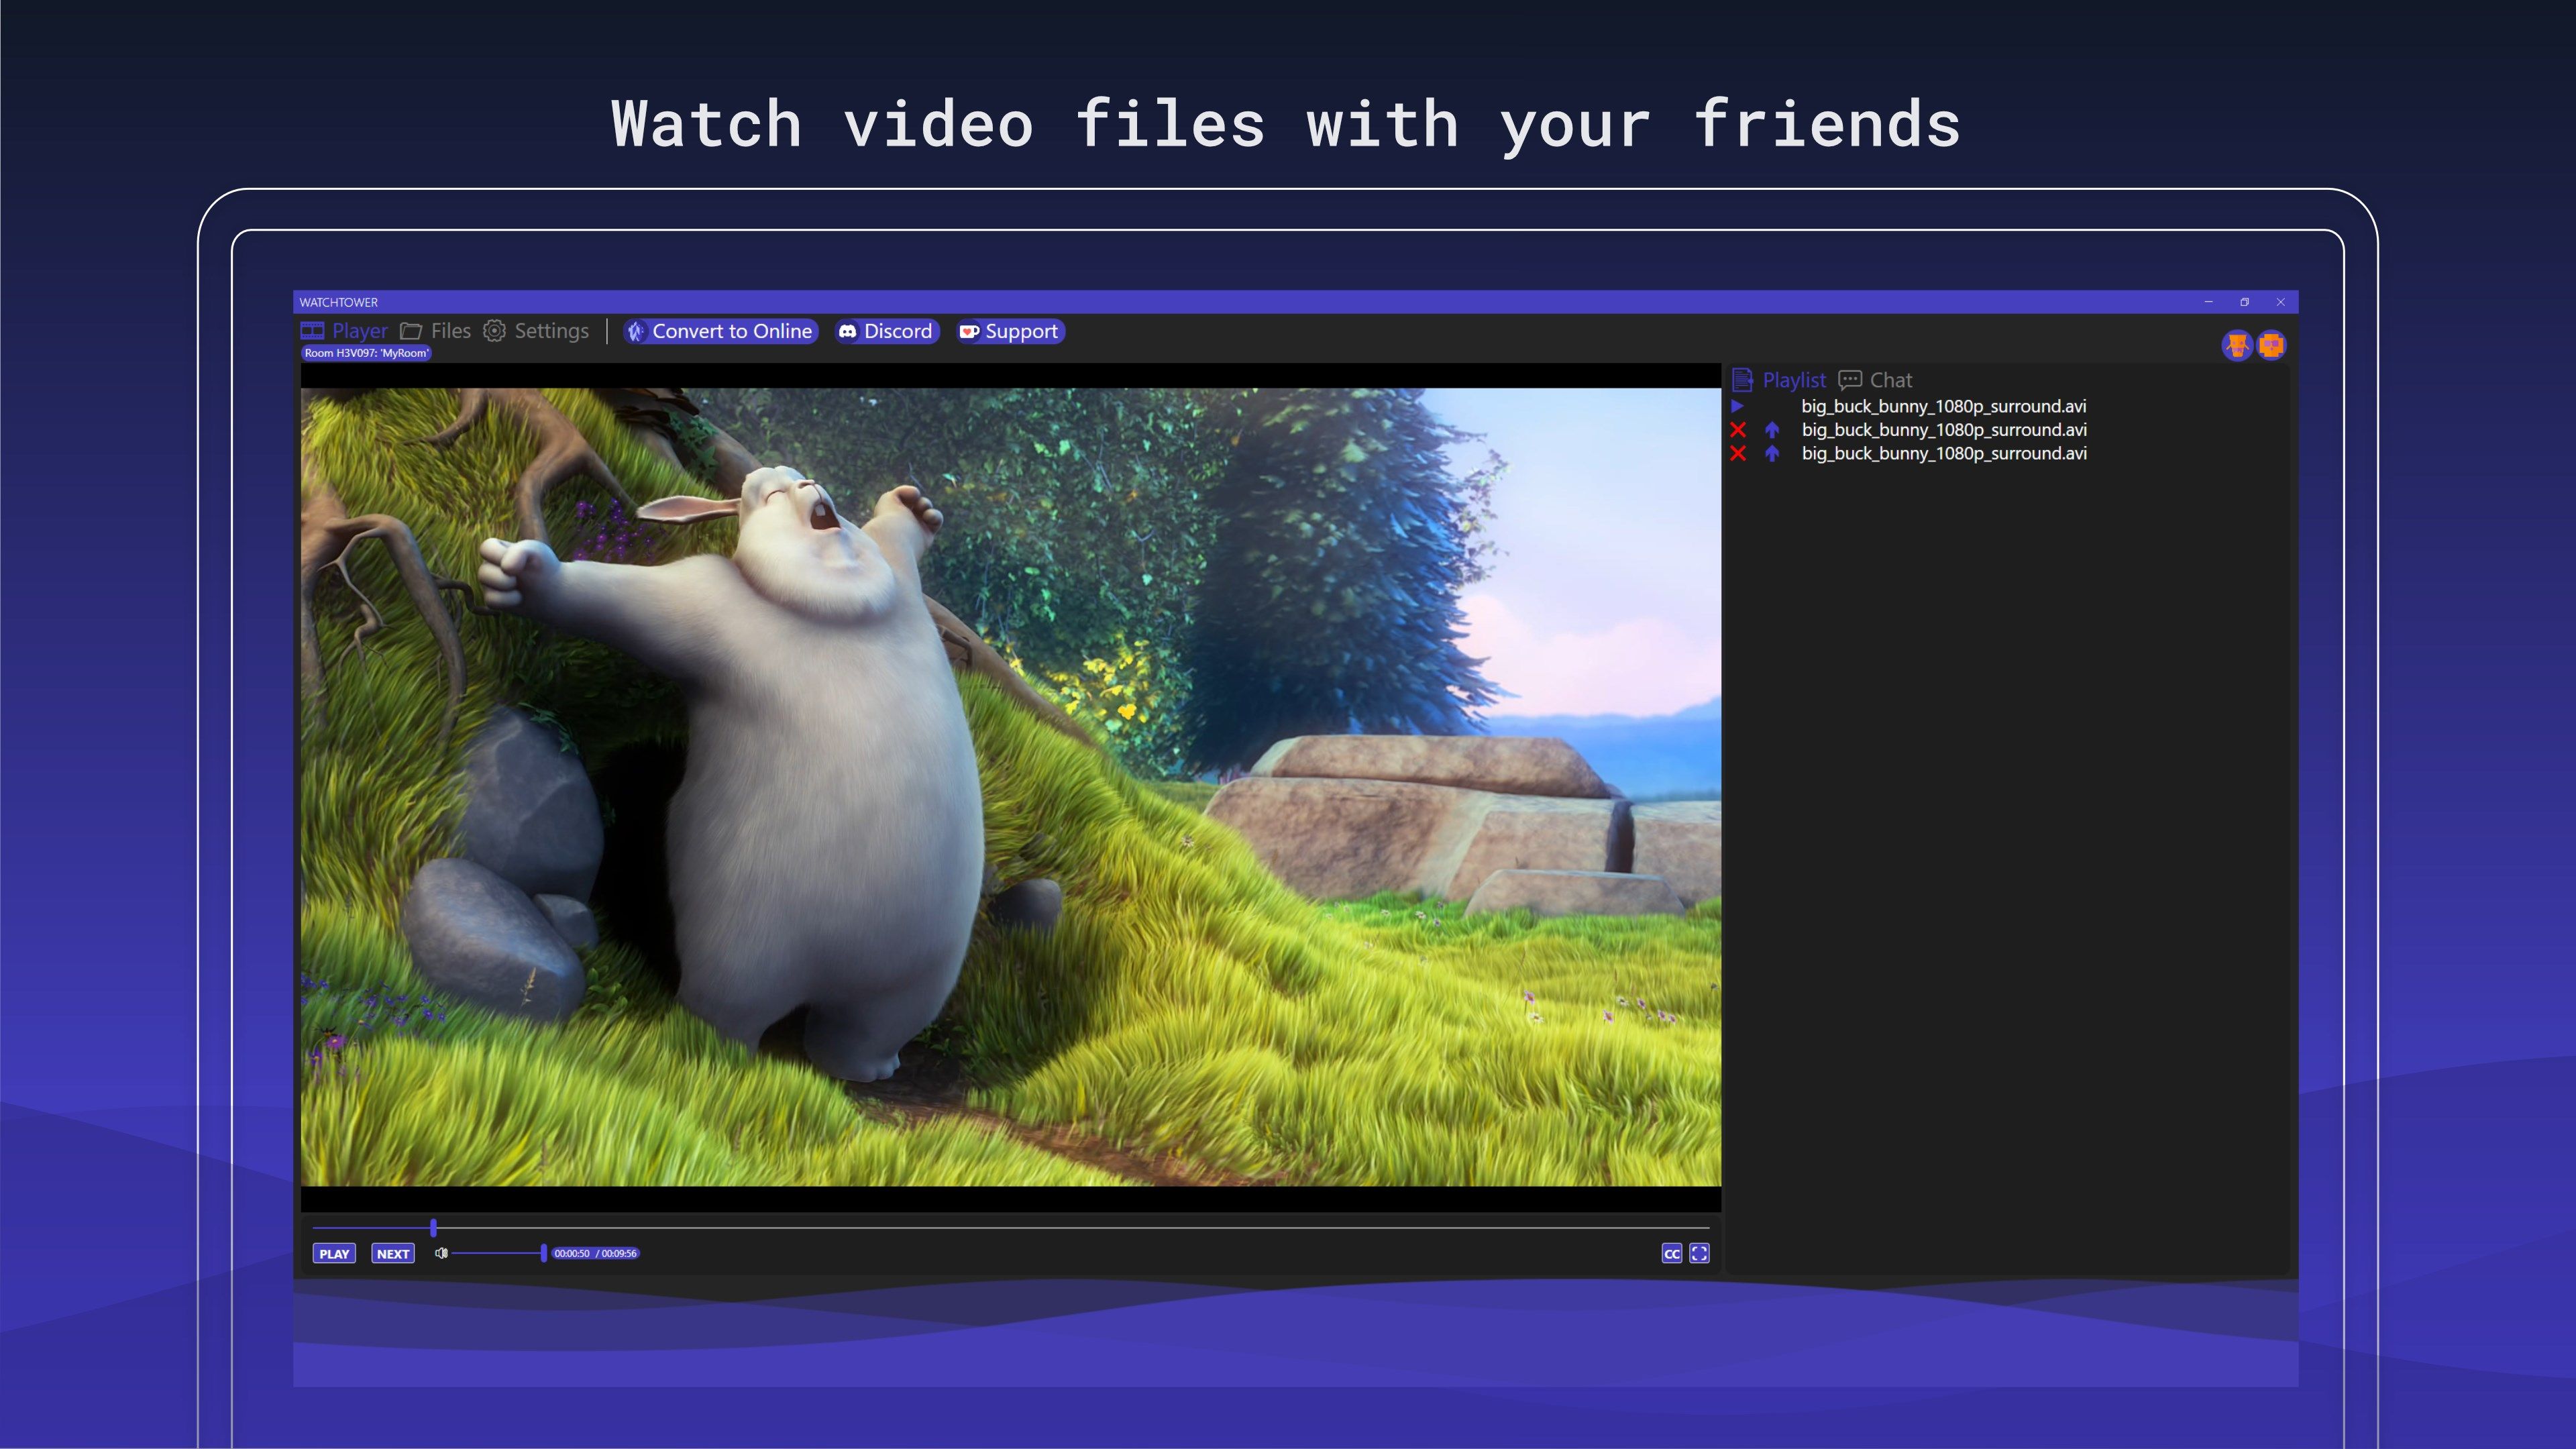 Watch video files with your friends